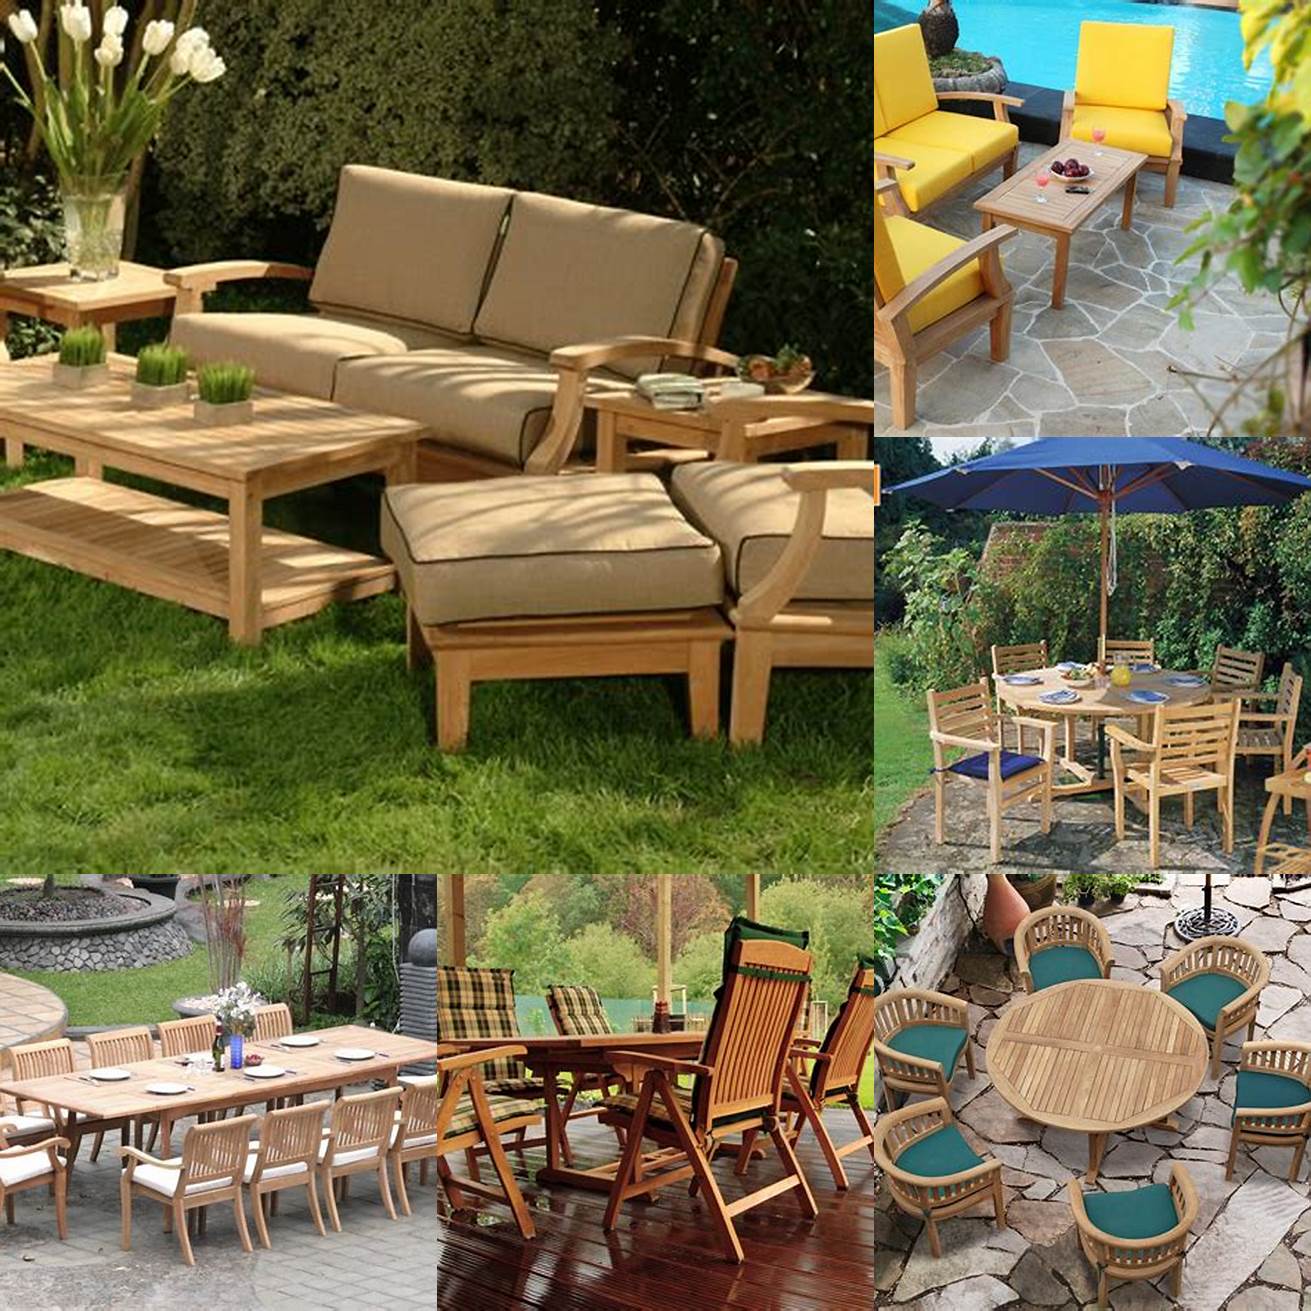 Pros and Cons of Corido Teak Furniture